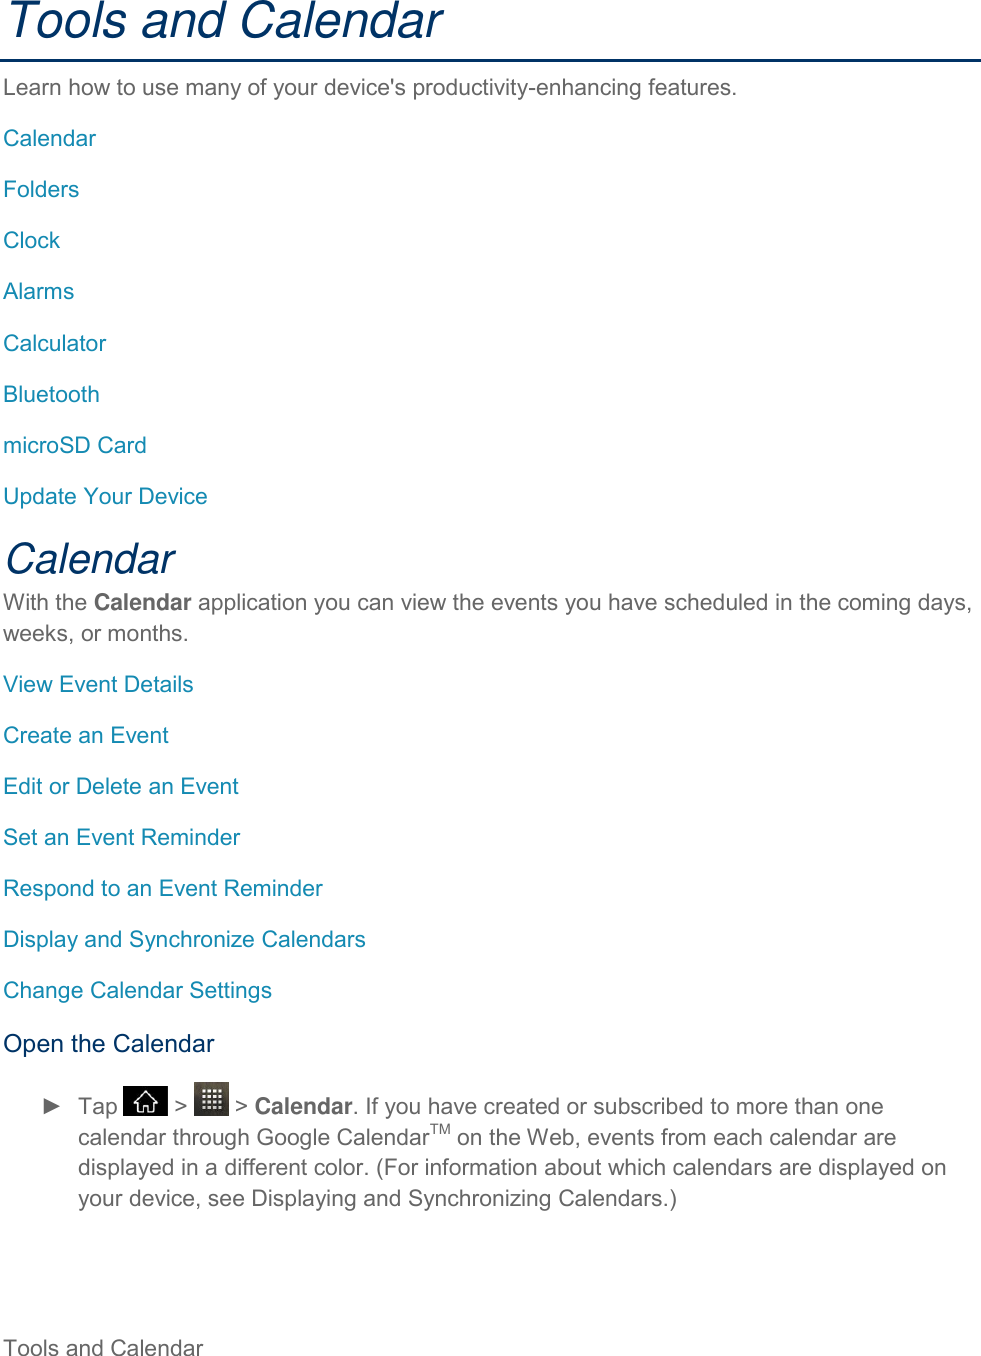  Tools and Calendar     Tools and Calendar Learn how to use many of your device&apos;s productivity-enhancing features. Calendar Folders Clock Alarms Calculator Bluetooth microSD Card Update Your Device Calendar With the Calendar application you can view the events you have scheduled in the coming days, weeks, or months. View Event Details Create an Event Edit or Delete an Event Set an Event Reminder Respond to an Event Reminder Display and Synchronize Calendars Change Calendar Settings Open the Calendar ►  Tap   &gt;   &gt; Calendar. If you have created or subscribed to more than one calendar through Google CalendarTM on the Web, events from each calendar are displayed in a different color. (For information about which calendars are displayed on your device, see Displaying and Synchronizing Calendars.) 